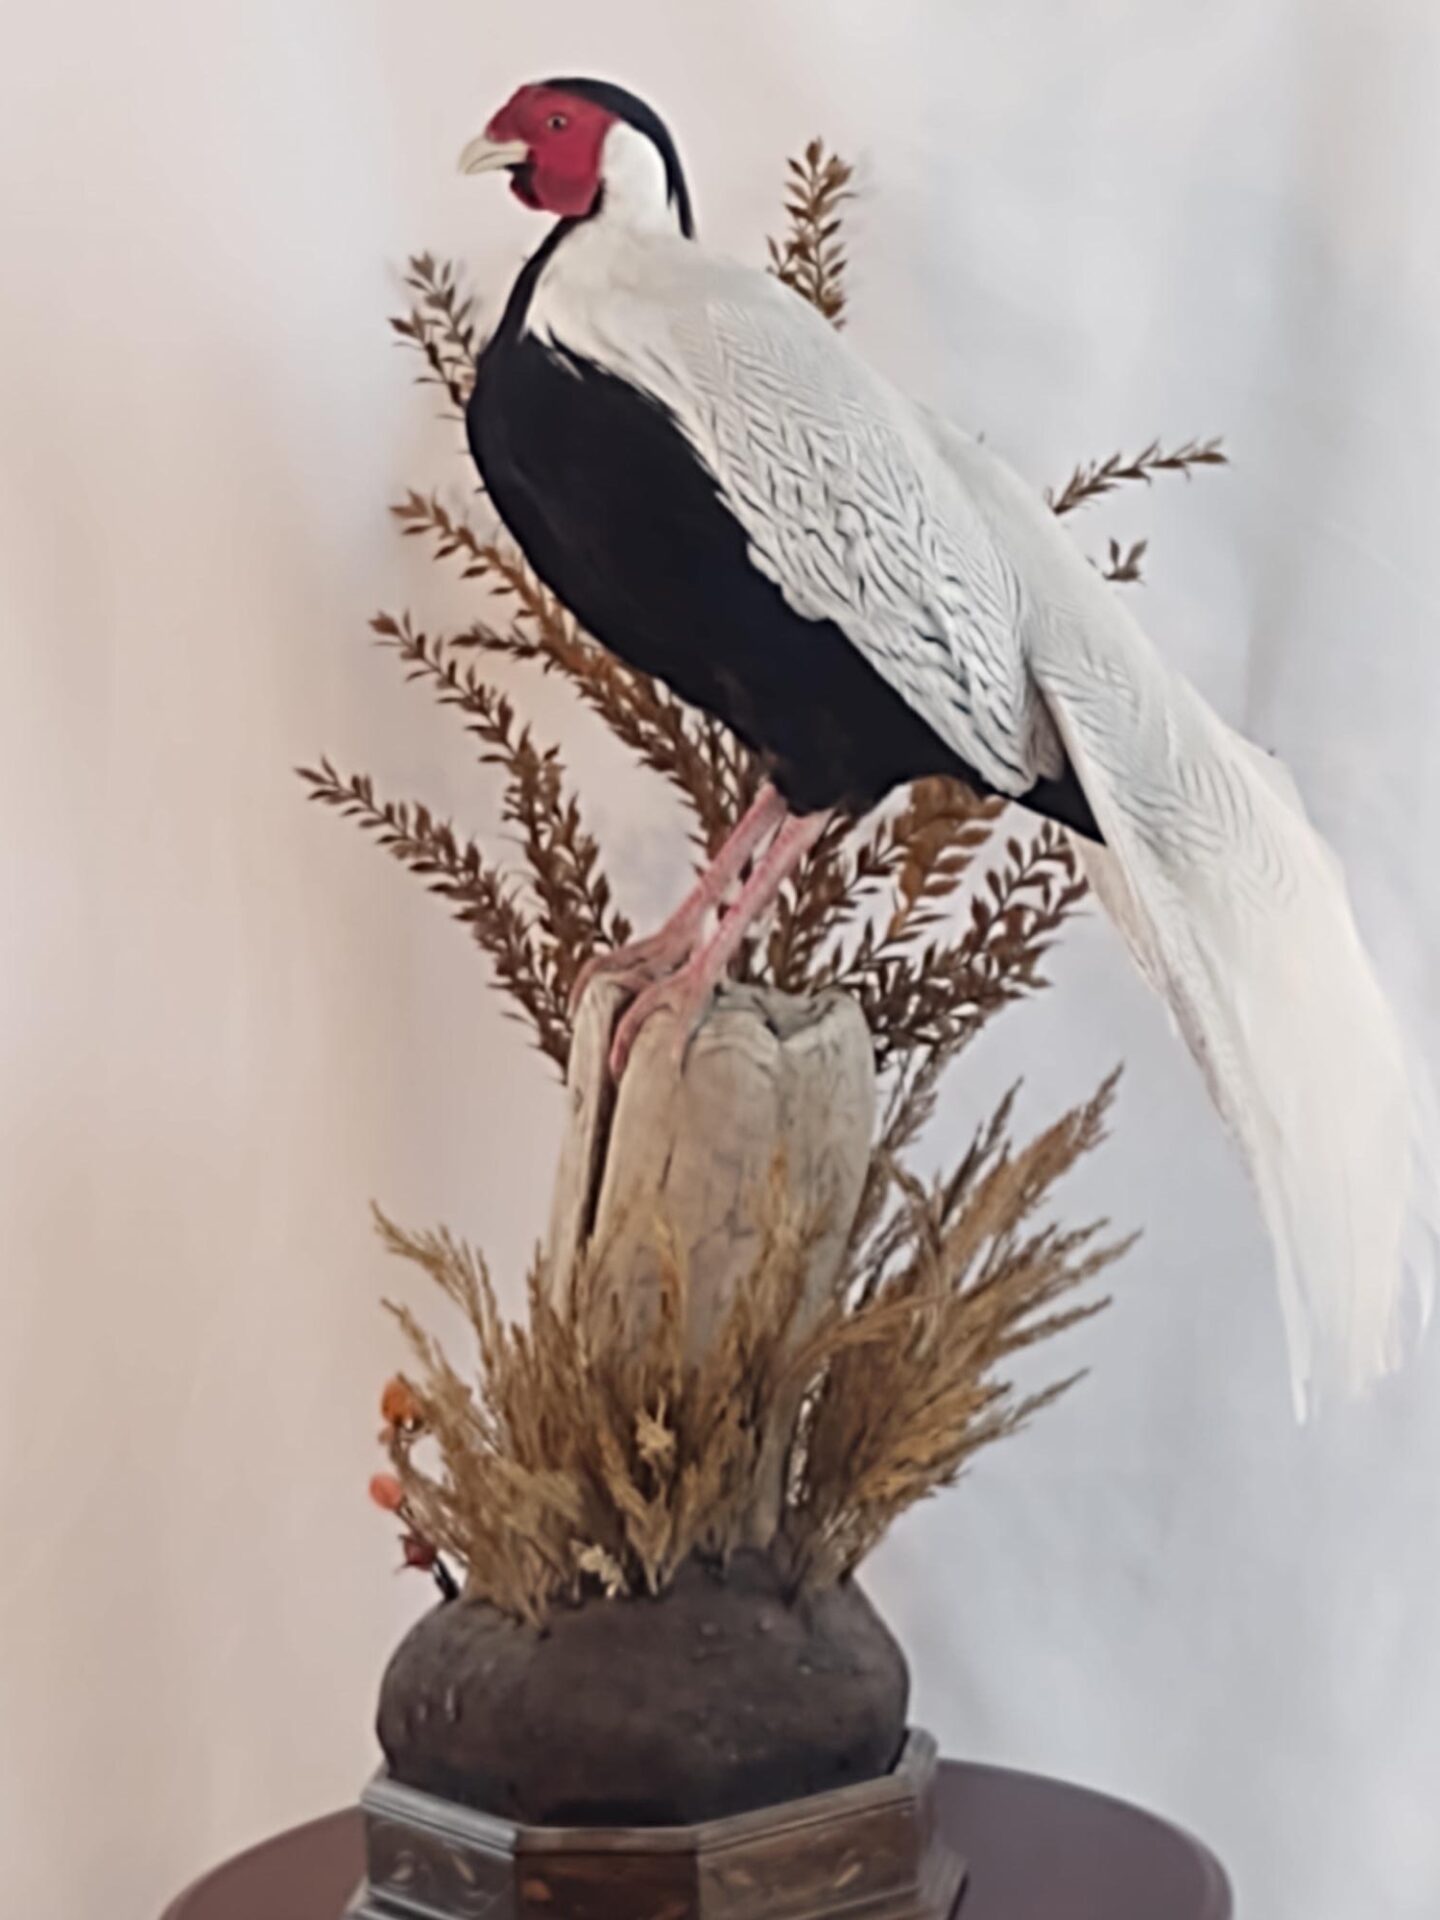 A long tailed bird taxidermy is put on display